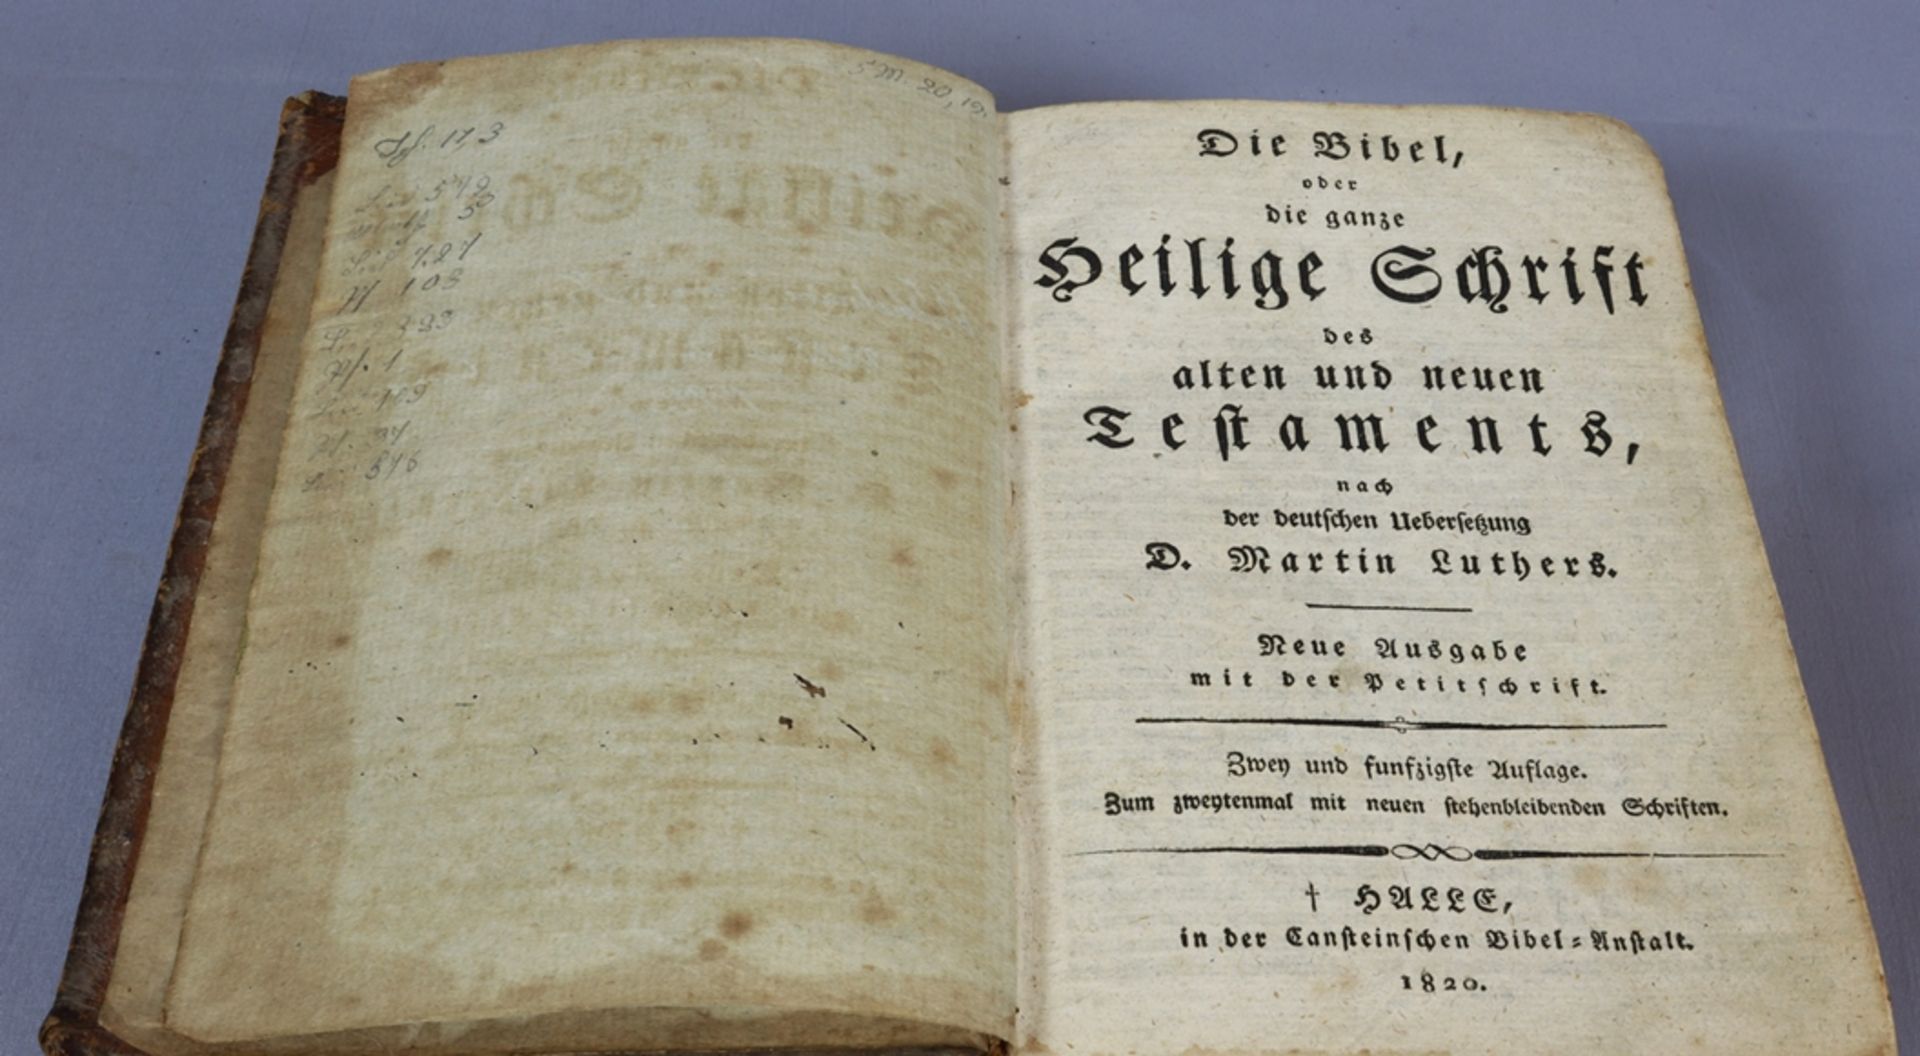 The Bible or the Whole Holy Scripture , Halle Cansteinschen Bibel-Anstalt 1820 - Image 2 of 3